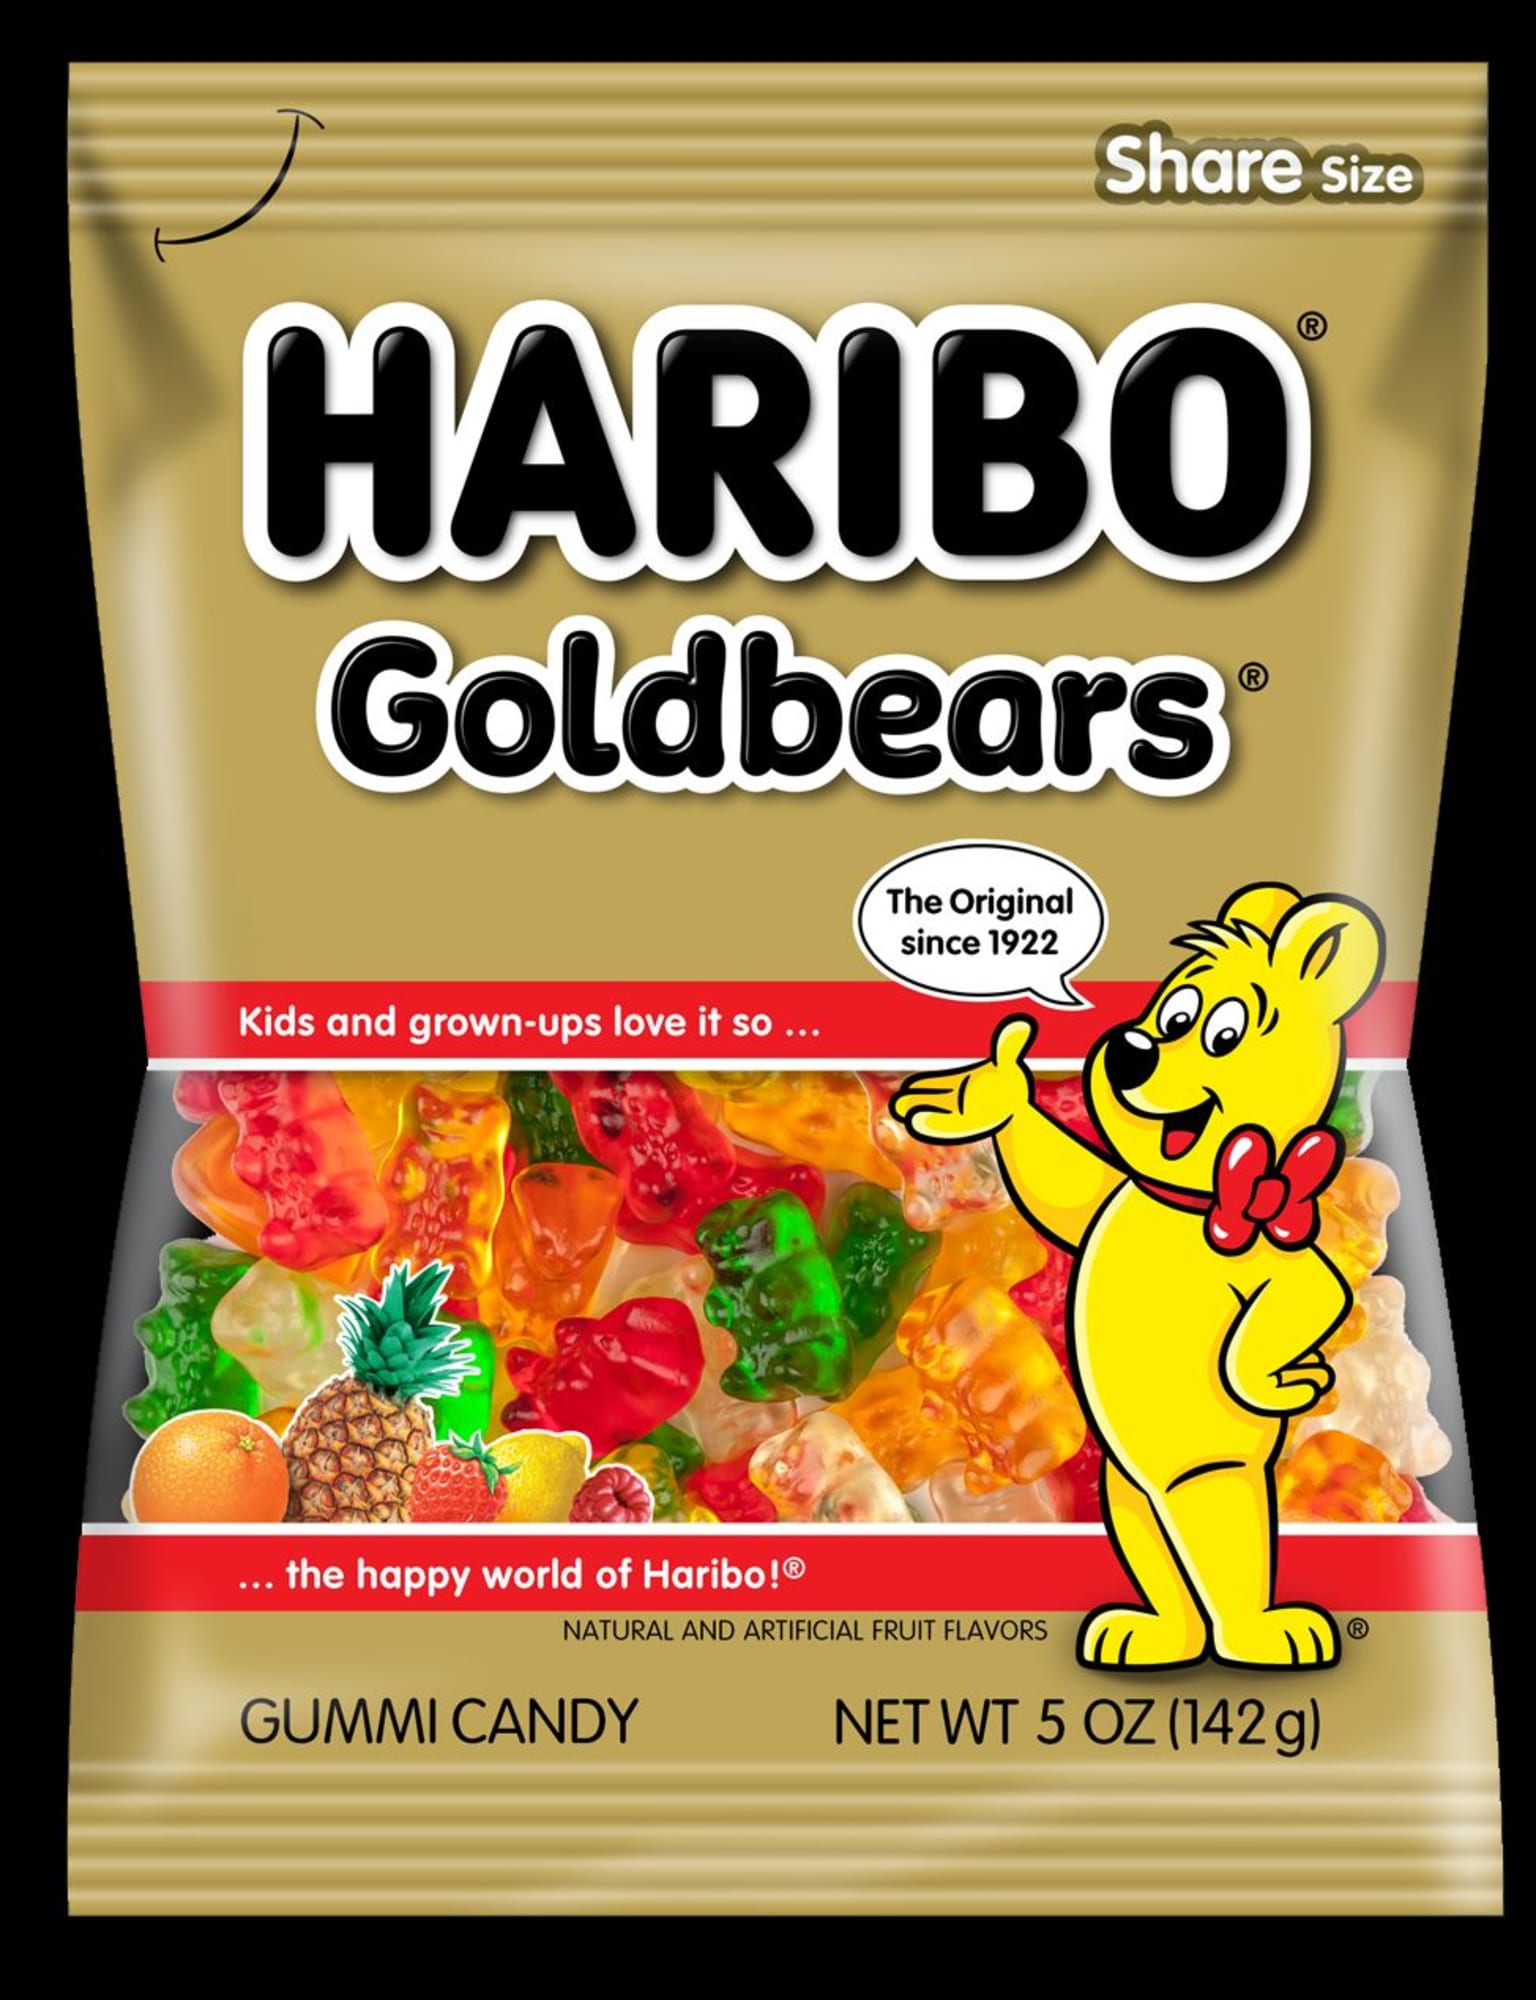 what flavor is the green gummy bear , what does the bear symbolize